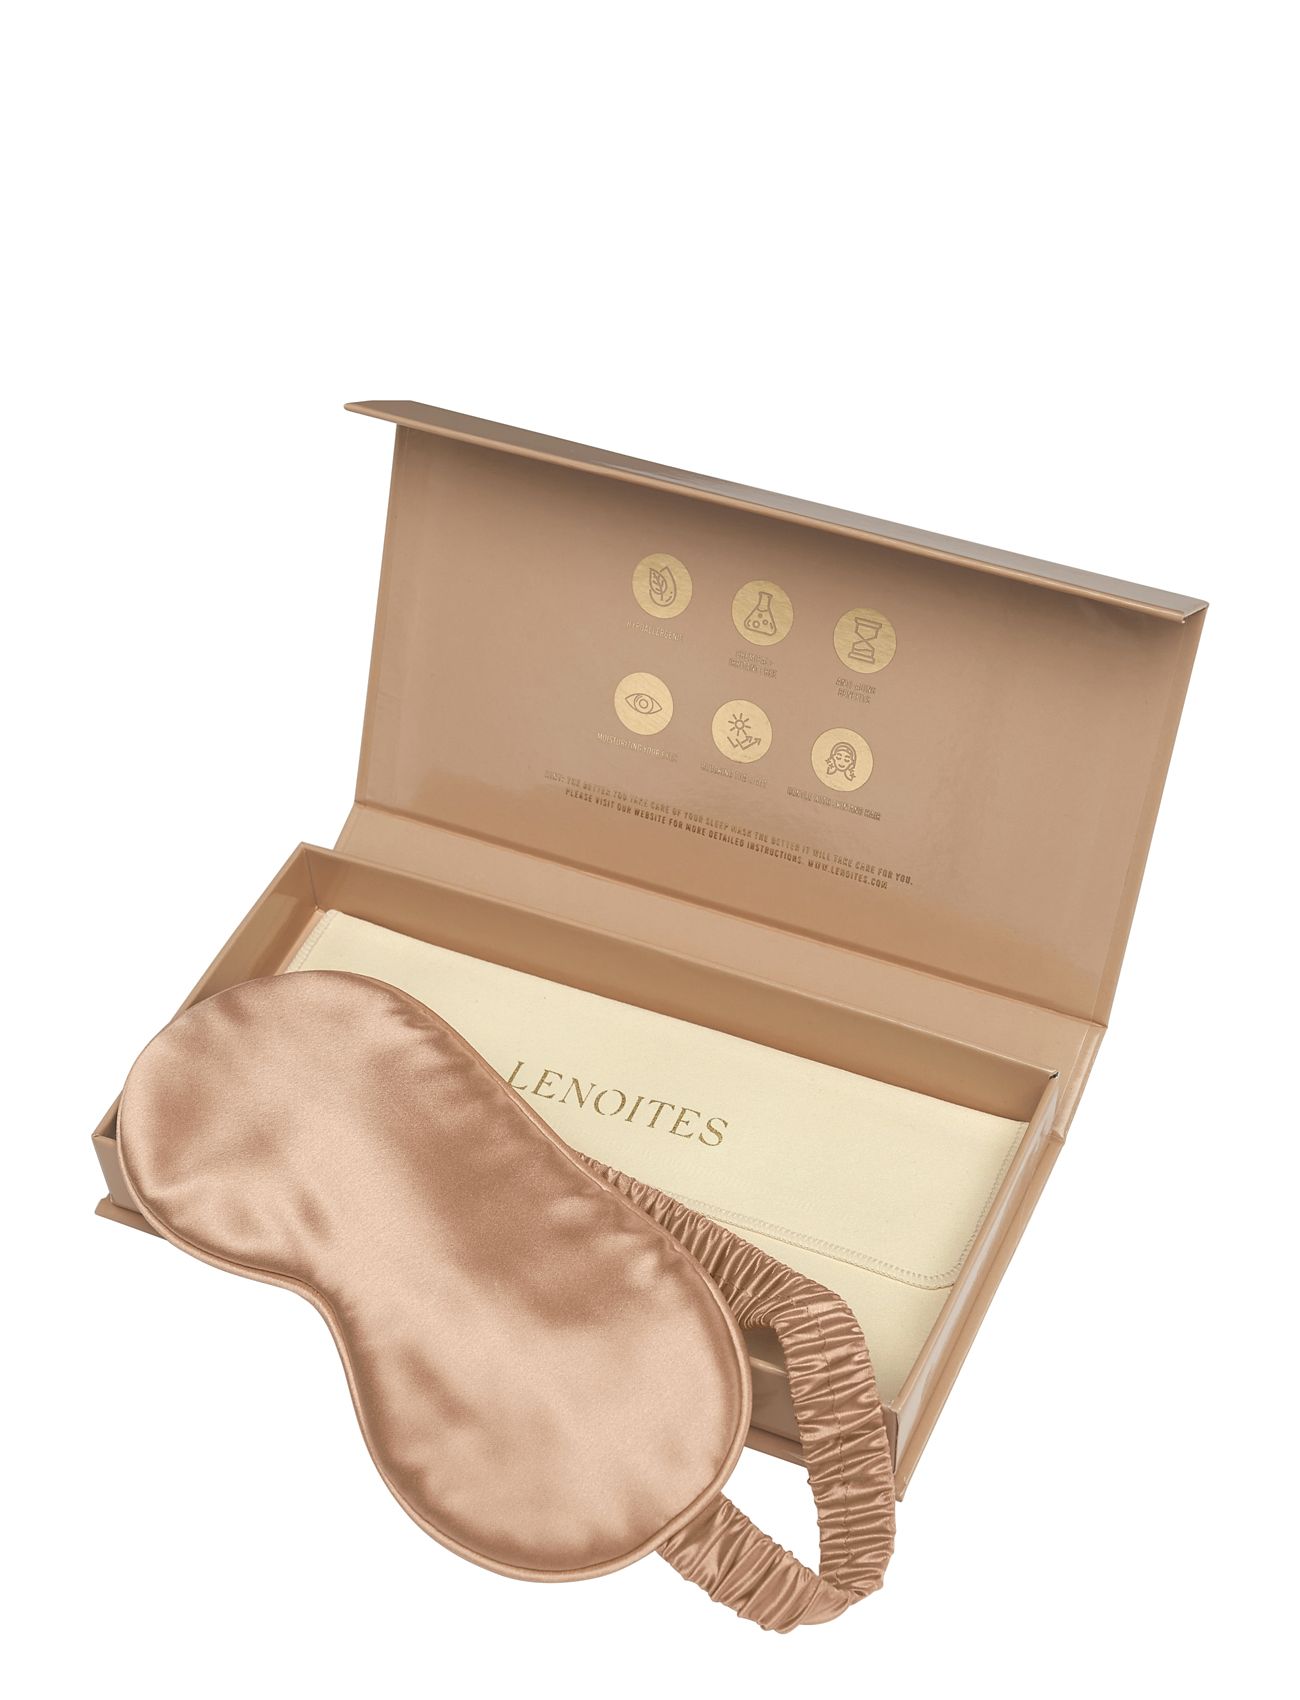 Mulberry Sleep Mask With Pouch Lingerie Night & Loungewear Sleeping Masks Gold Lenoites